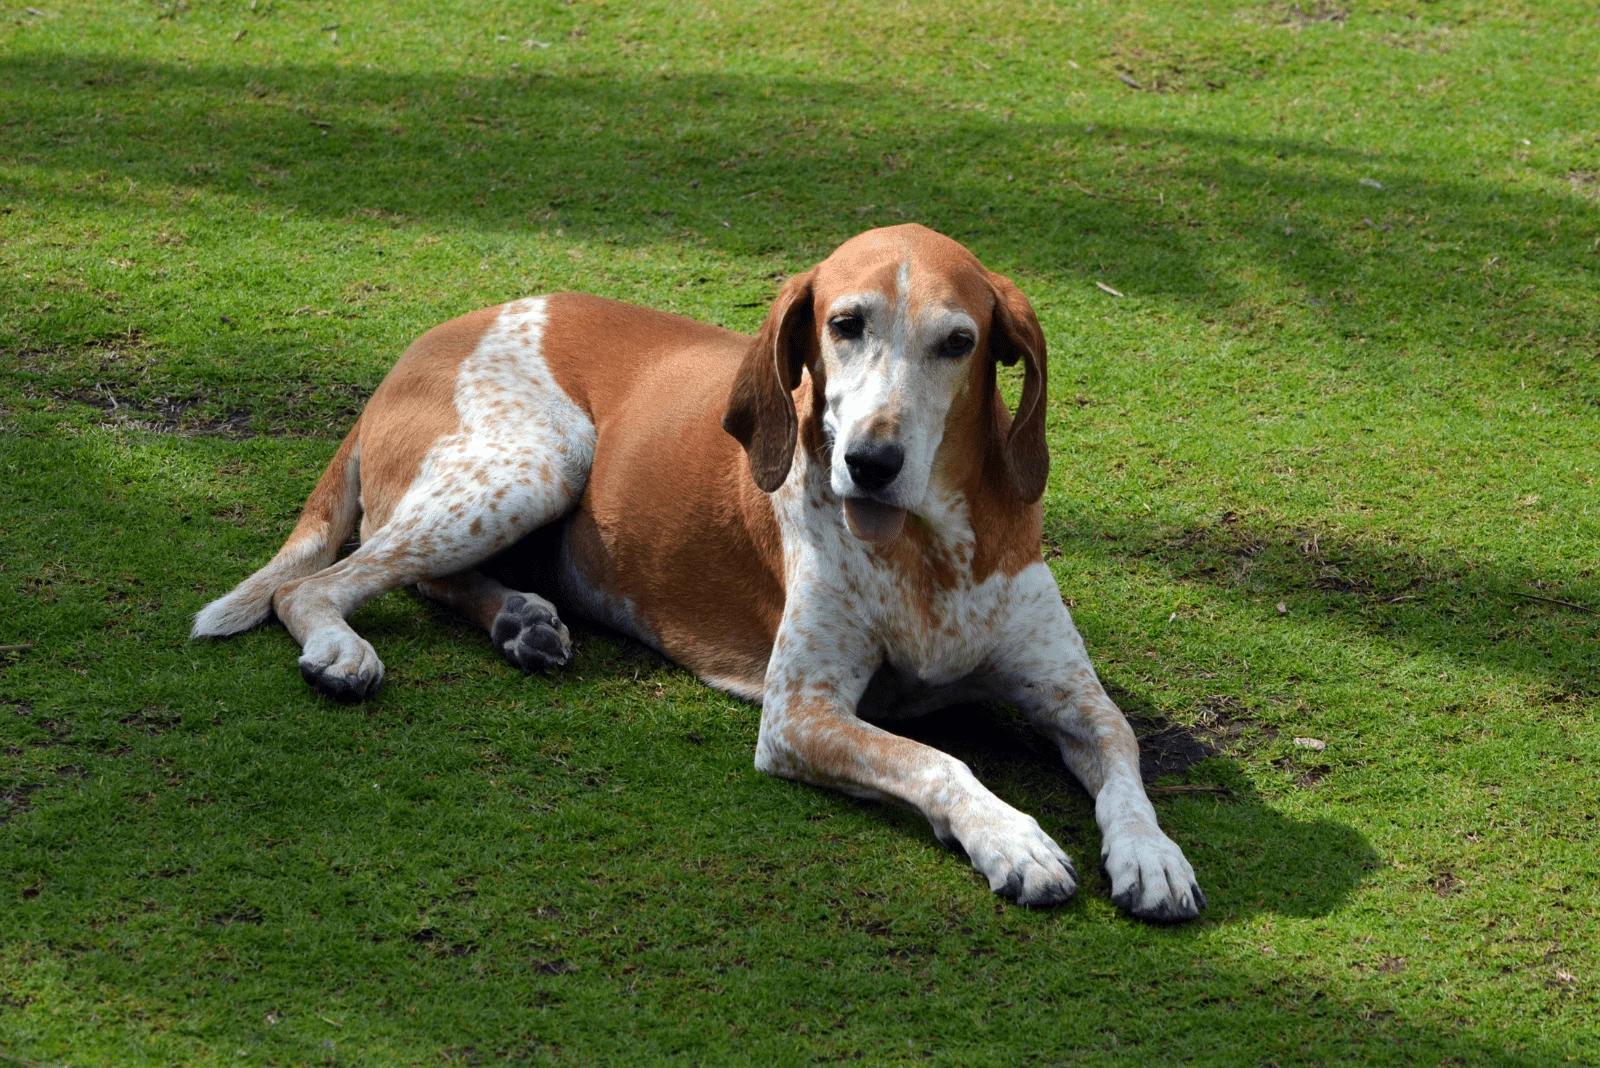 Coonhound is lying on the grass